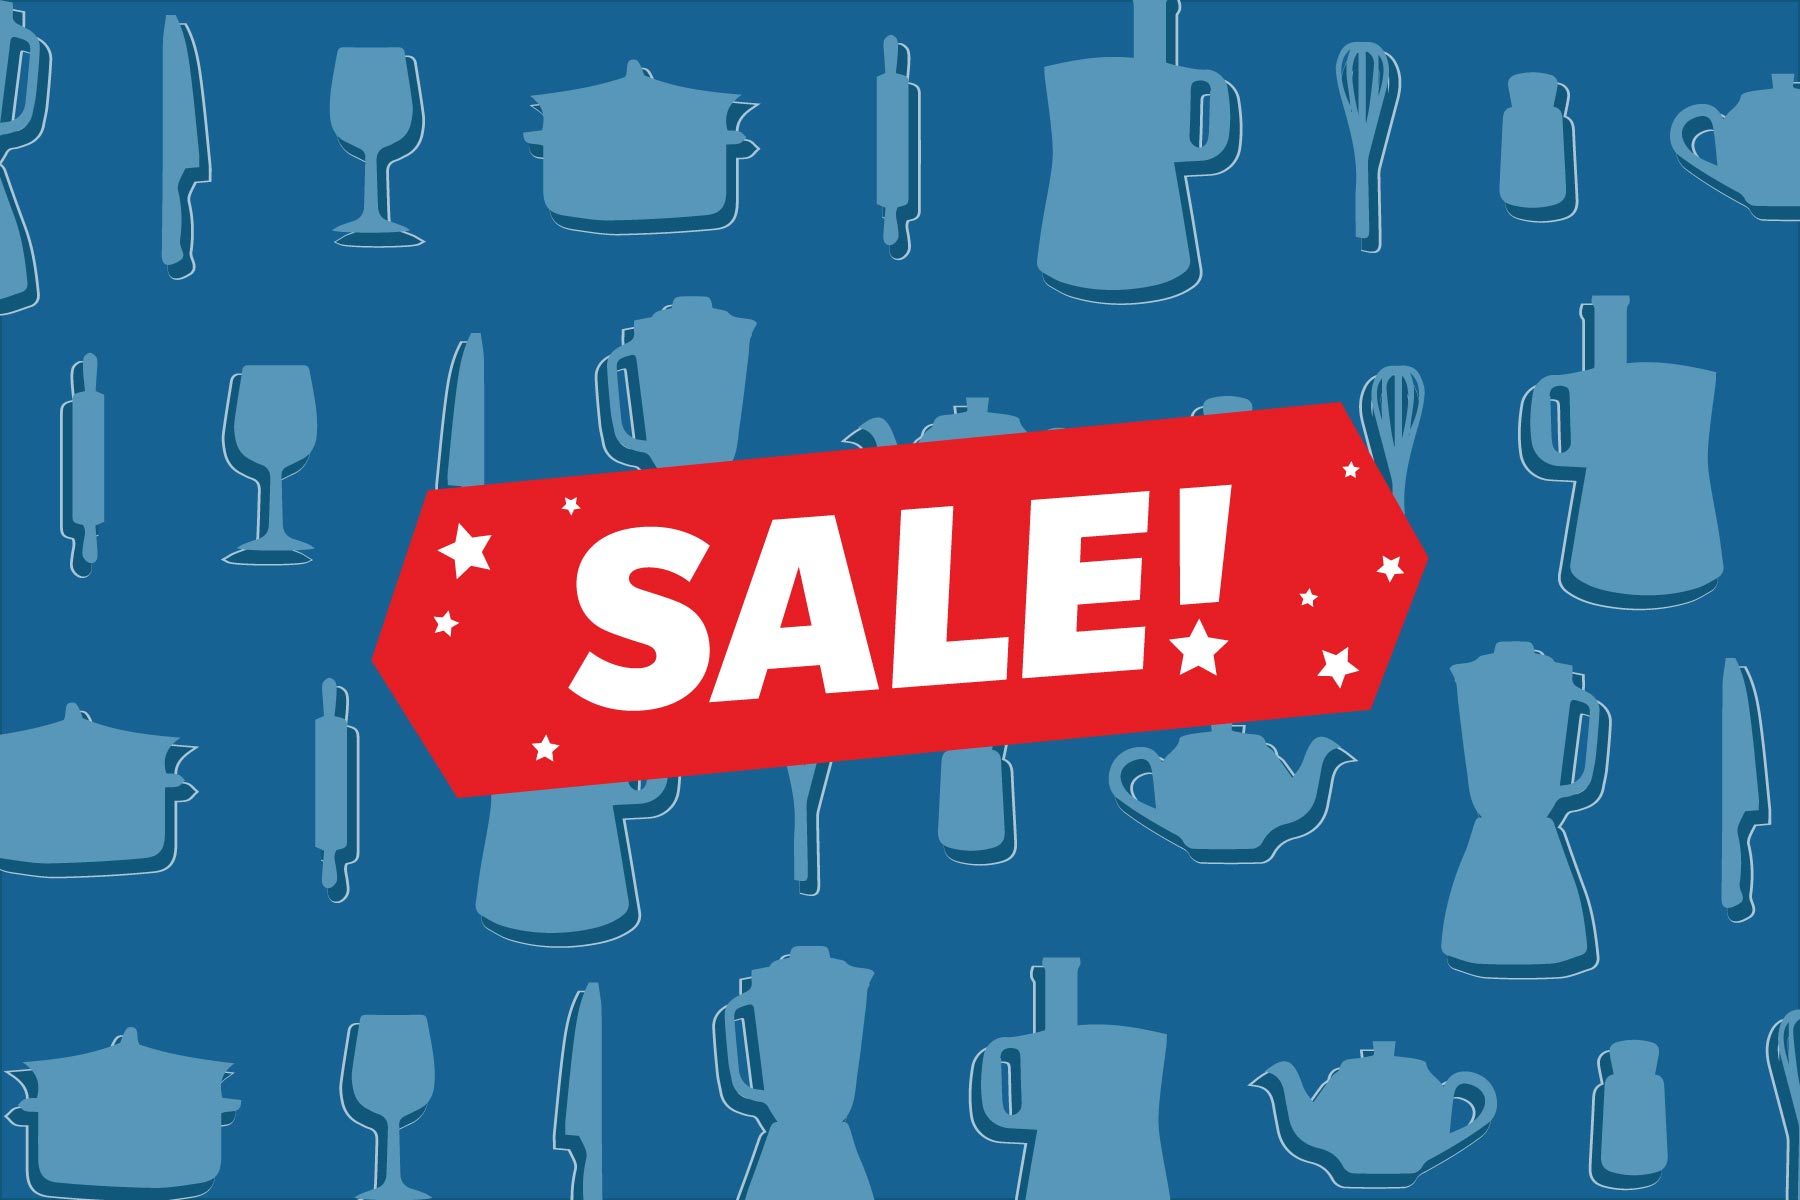 All-Clad Sale: Up to 65% off Factory Seconds Cookware and more +